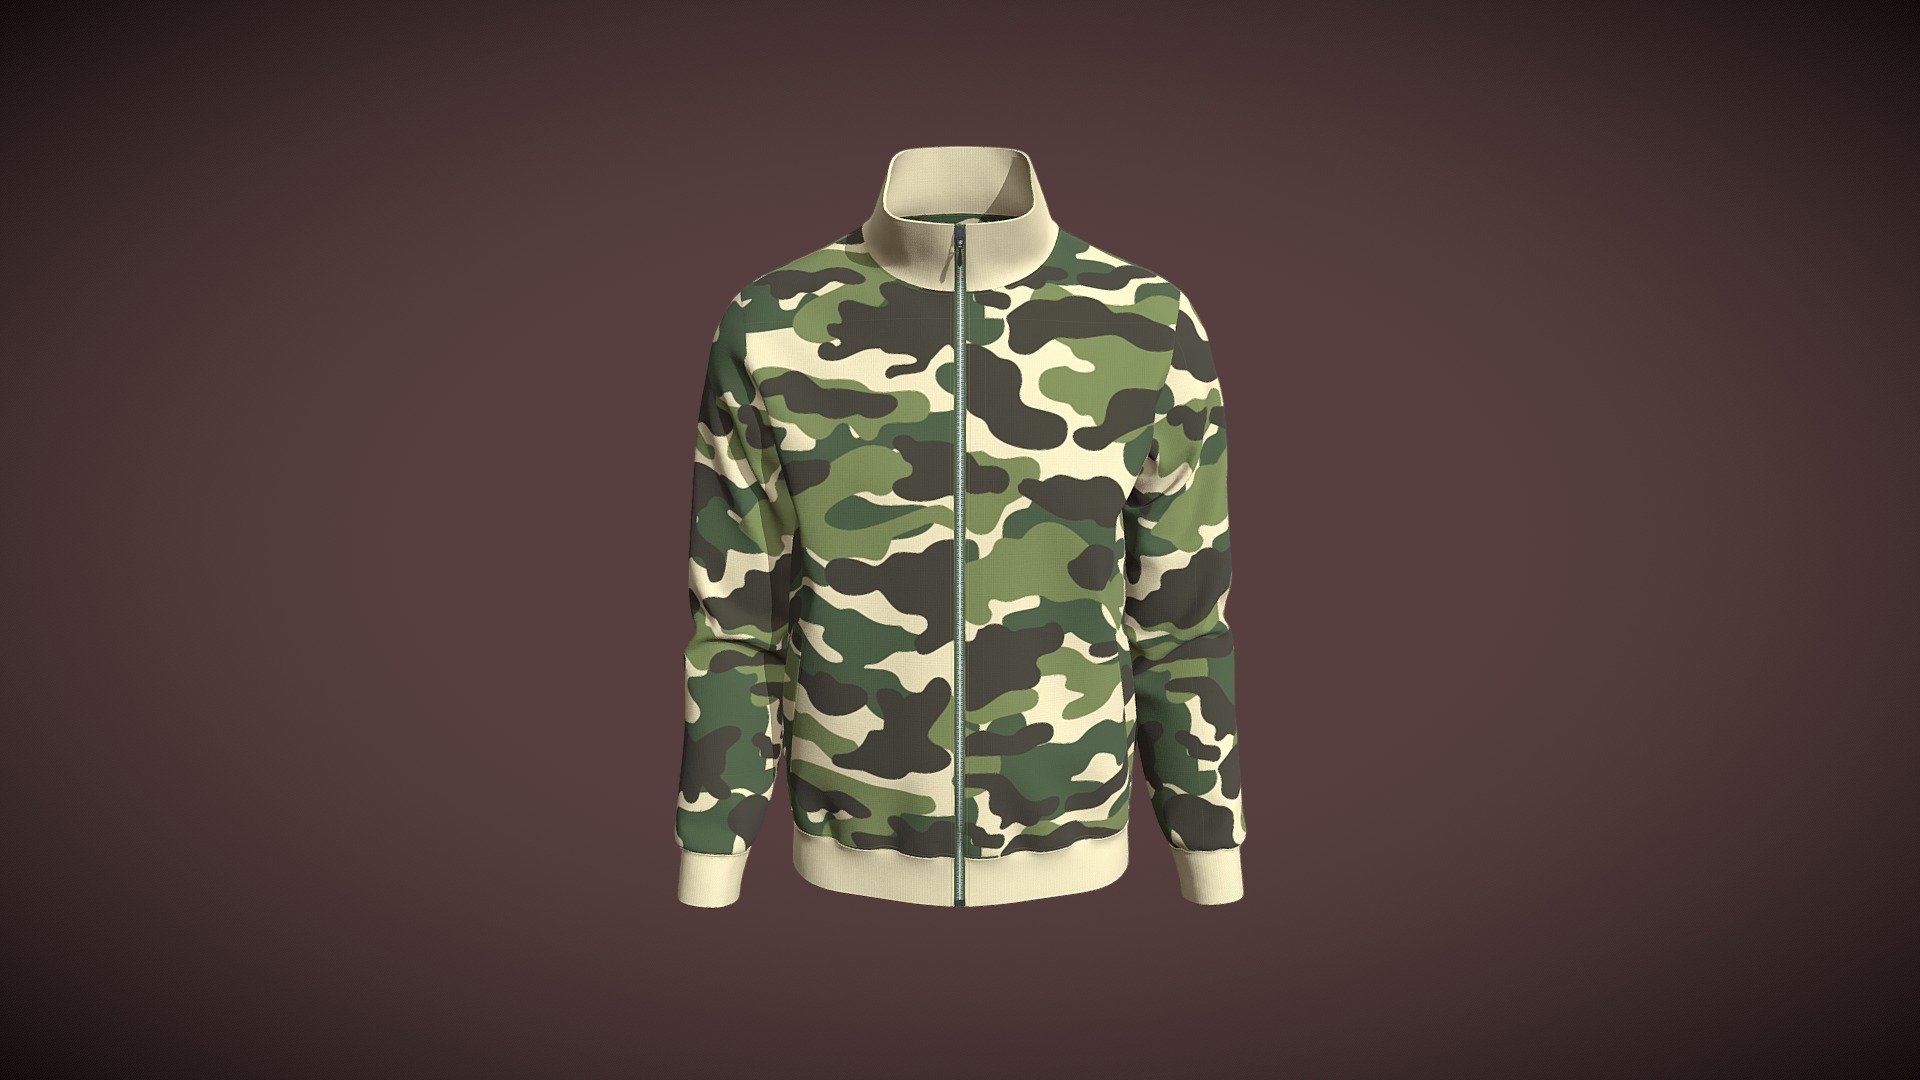 Cloth Title = Man's Classic Jacket Design With Camo 

SKU = DG100050 

Category = Men 

Product Type = Jacket 

Cloth Length = Regular 

Body Fit = Regular Fit 

Occasion = Outerwear 

Sleeve Style = Set In Sleeve 


Our Services:

3D Apparel Design

OBJ,FBX,GLTF Making with High/Low Poly

Fabric Digitalization

Mockup making

3D Teck Pack

Pattern Making

2D Illustration

Cloth Animation and 360 Spin Video


Contact us:- 

Email: info@digitalfashionwear.com 

Website: https://digitalfashionwear.com 

WhatsApp No: +8801759350445 


We designed all the types of cloth specially focused on product visualization, e-commerce, fitting, and production. 

We will design: 

T-shirts 

Polo shirts 

Hoodies 

Sweatshirt 

Jackets 

Shirts 

TankTops 

Trousers 

Bras 

Underwear 

Blazer 

Aprons 

Leggings 

and All Fashion items. 





Our goal is to make sure what we provide you, meets your demand 3d model